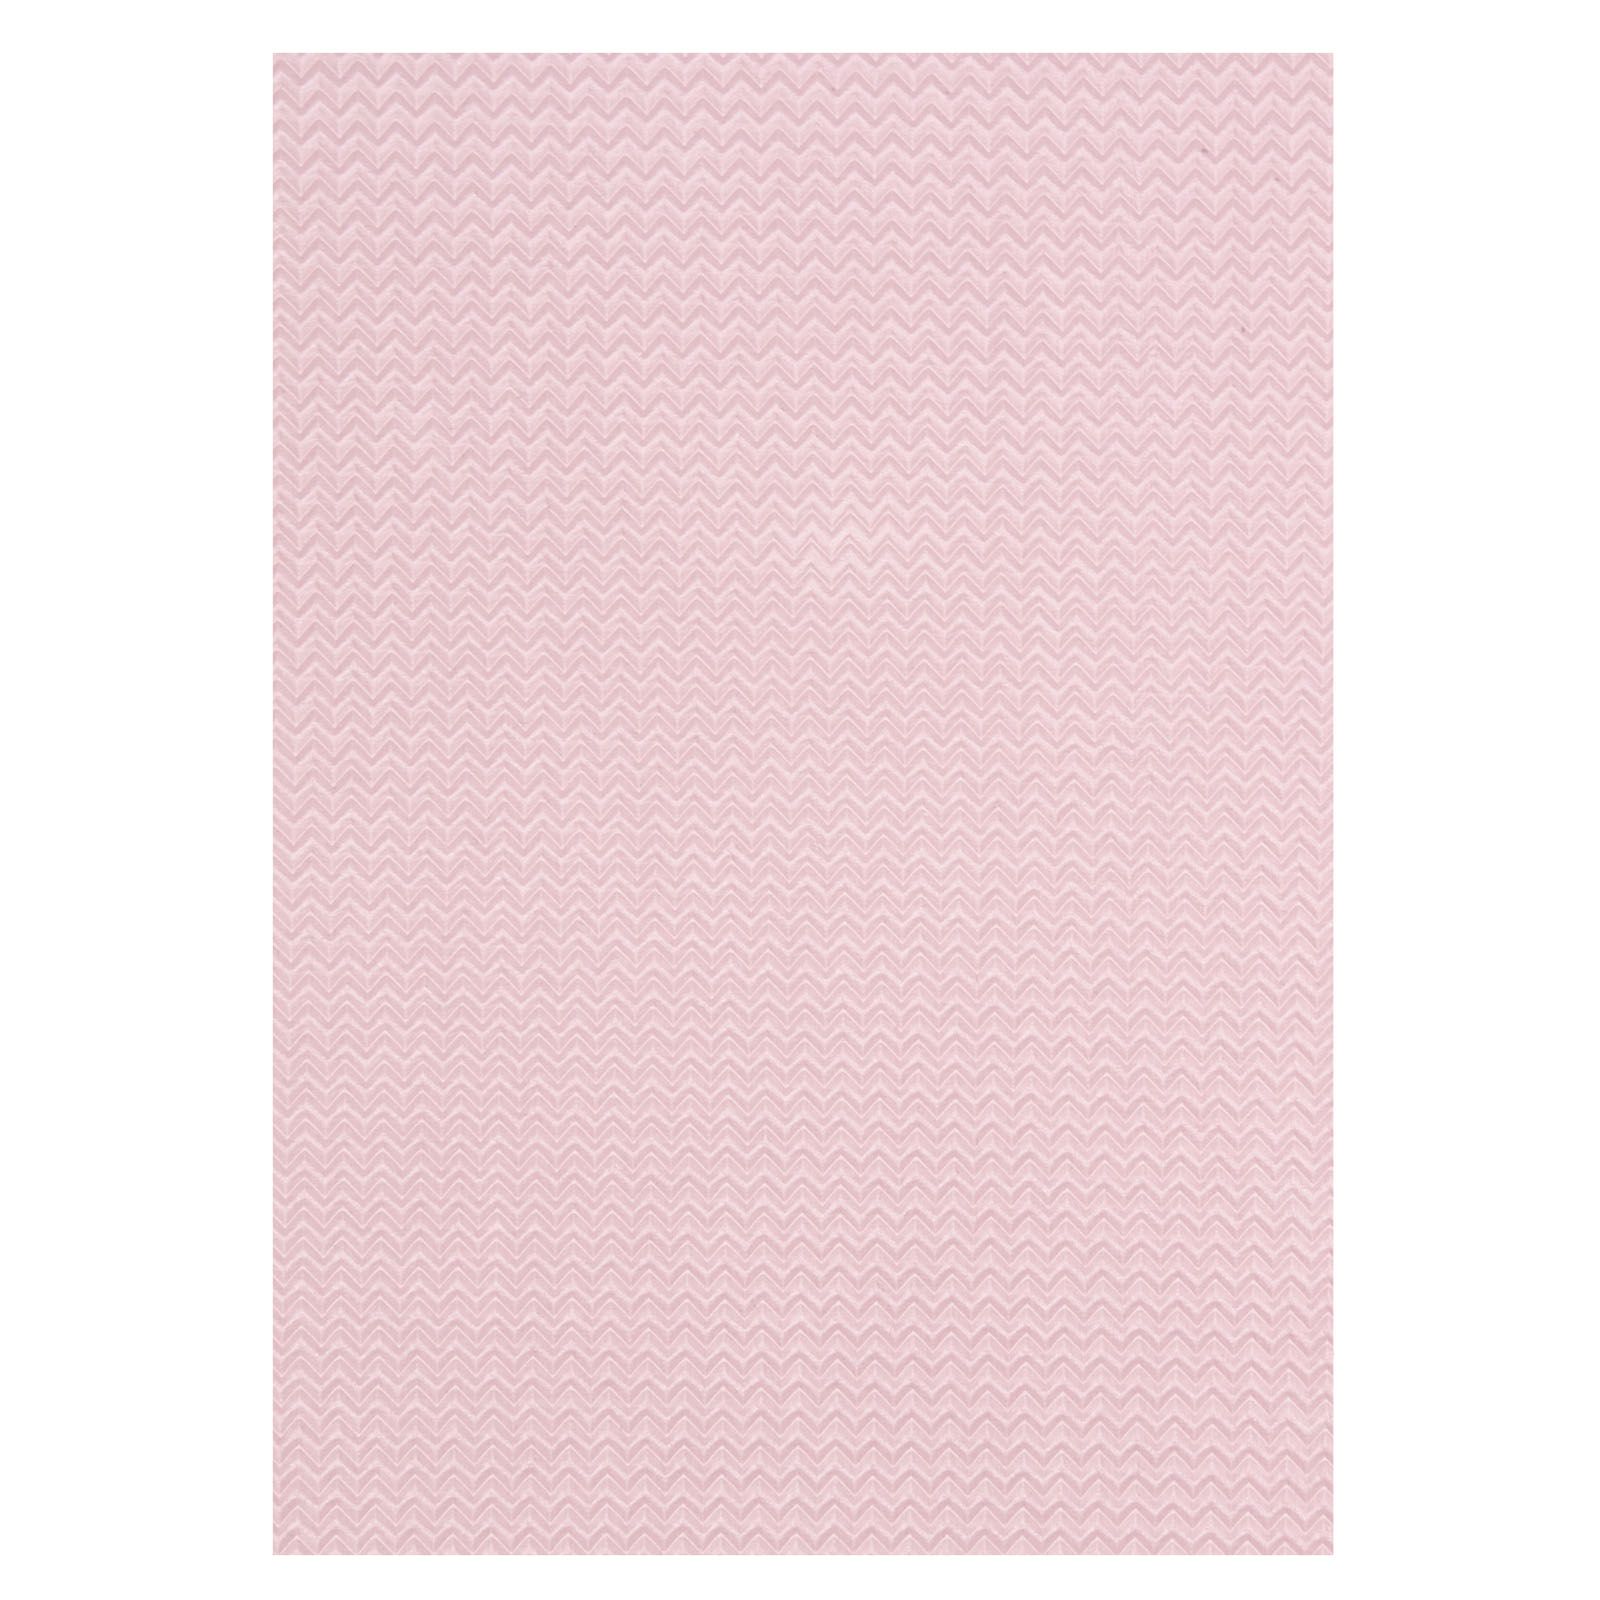 Craft Perfect • Sweet sorbet handmade papers Marshmallow pink